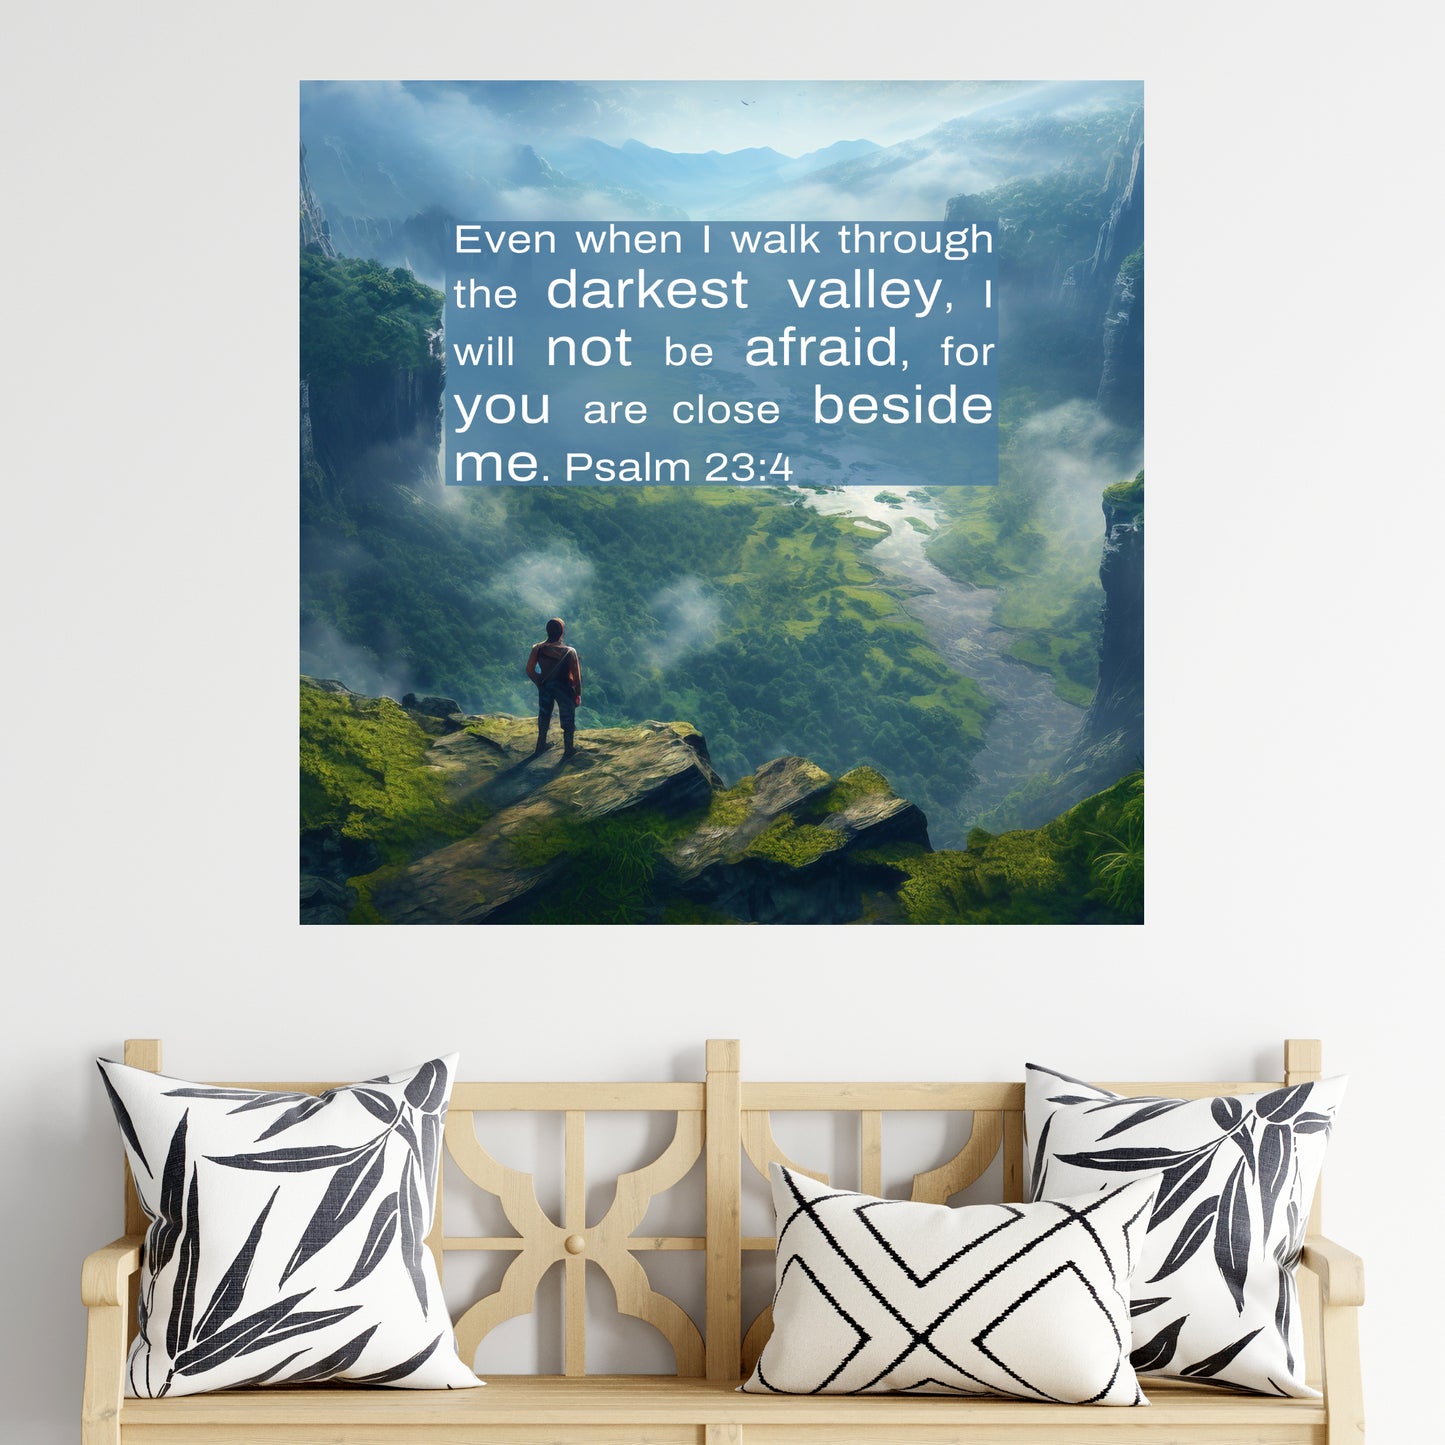 christian aesthetic wall art gifts, christian art painting even though i walk through the valley